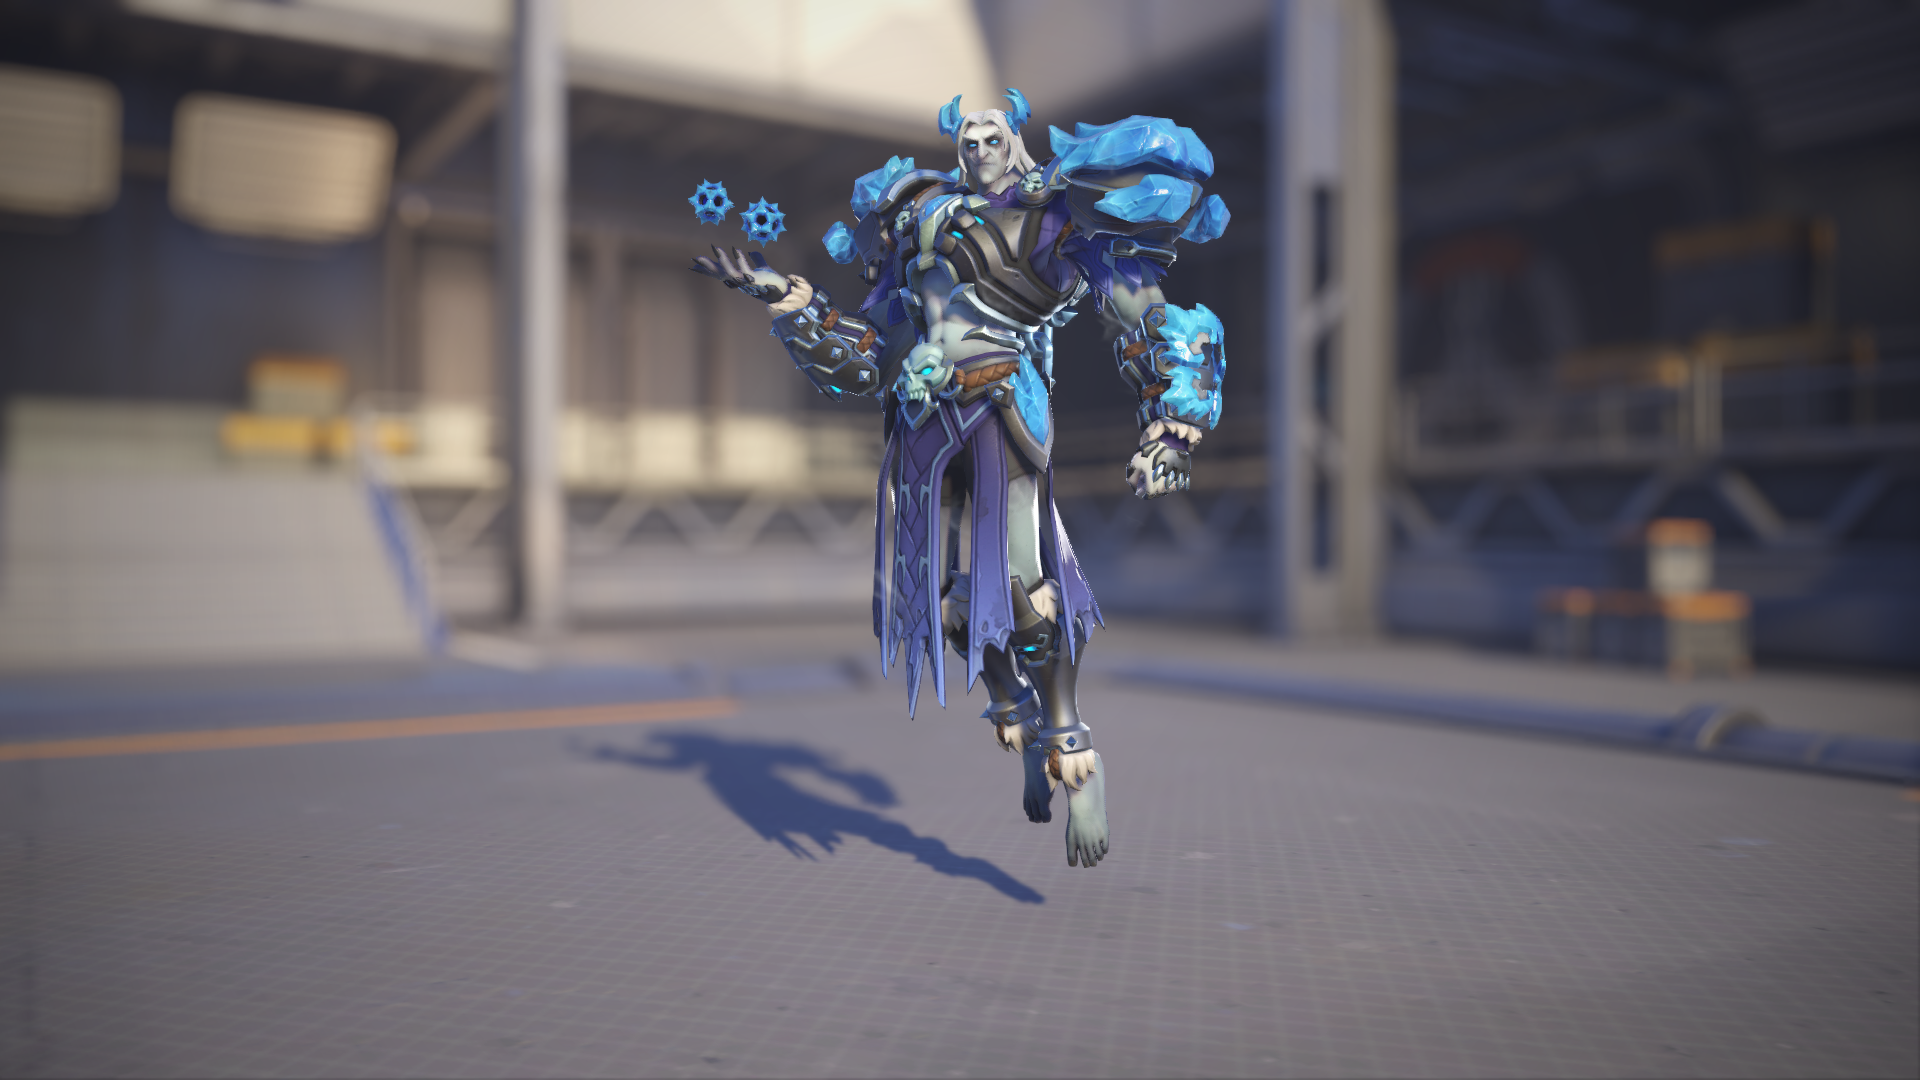 Sigma models his Rime skin in Overwatch 2.